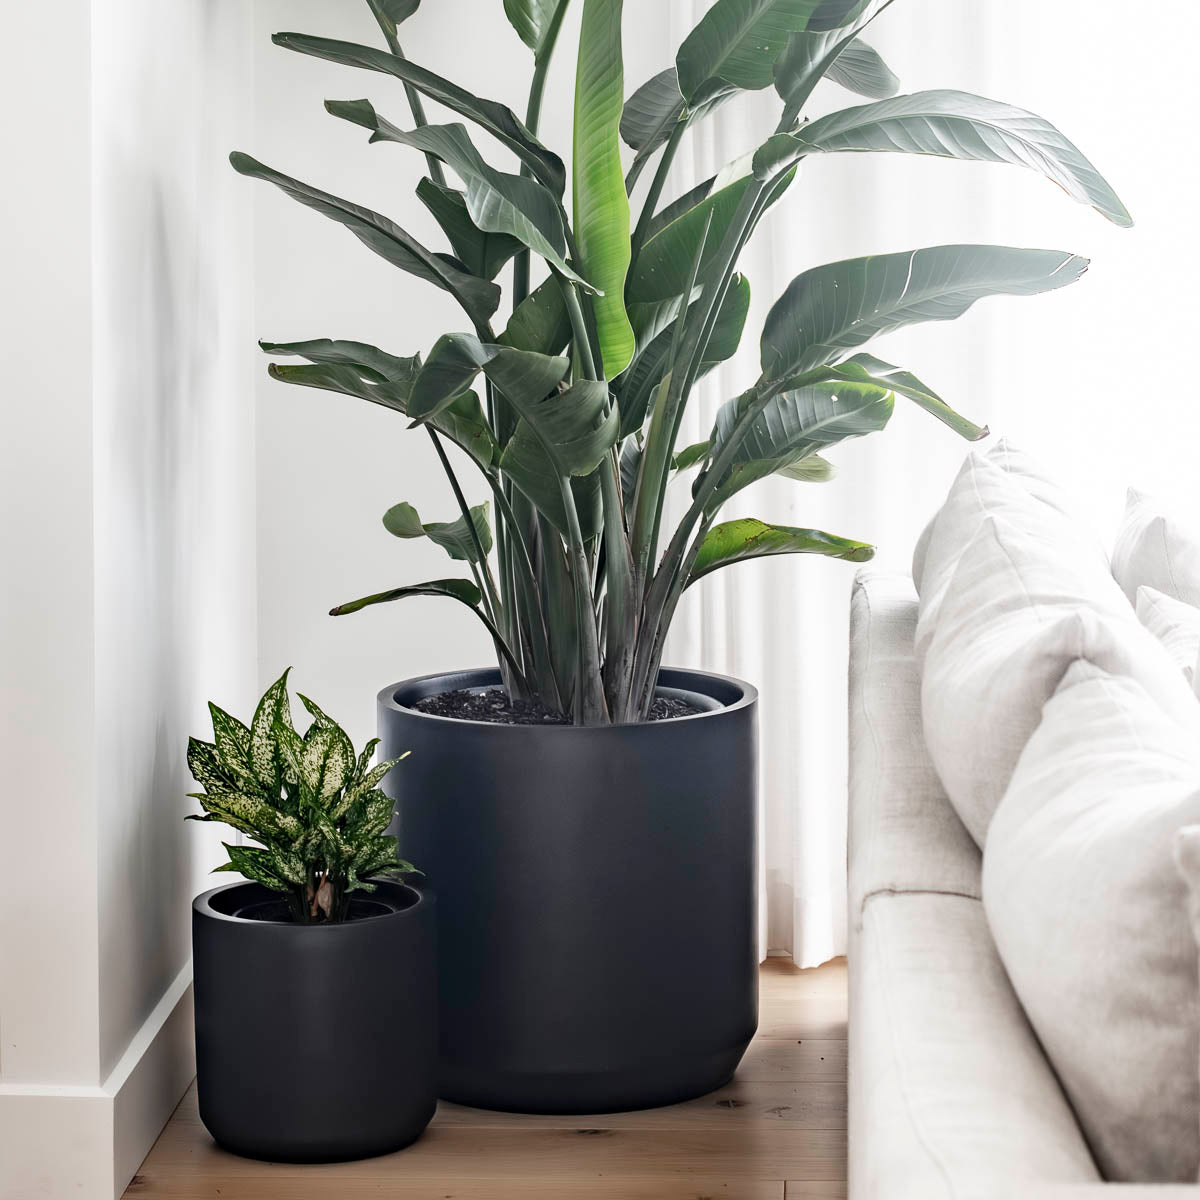 How to Choose the Right Plants for Your Space